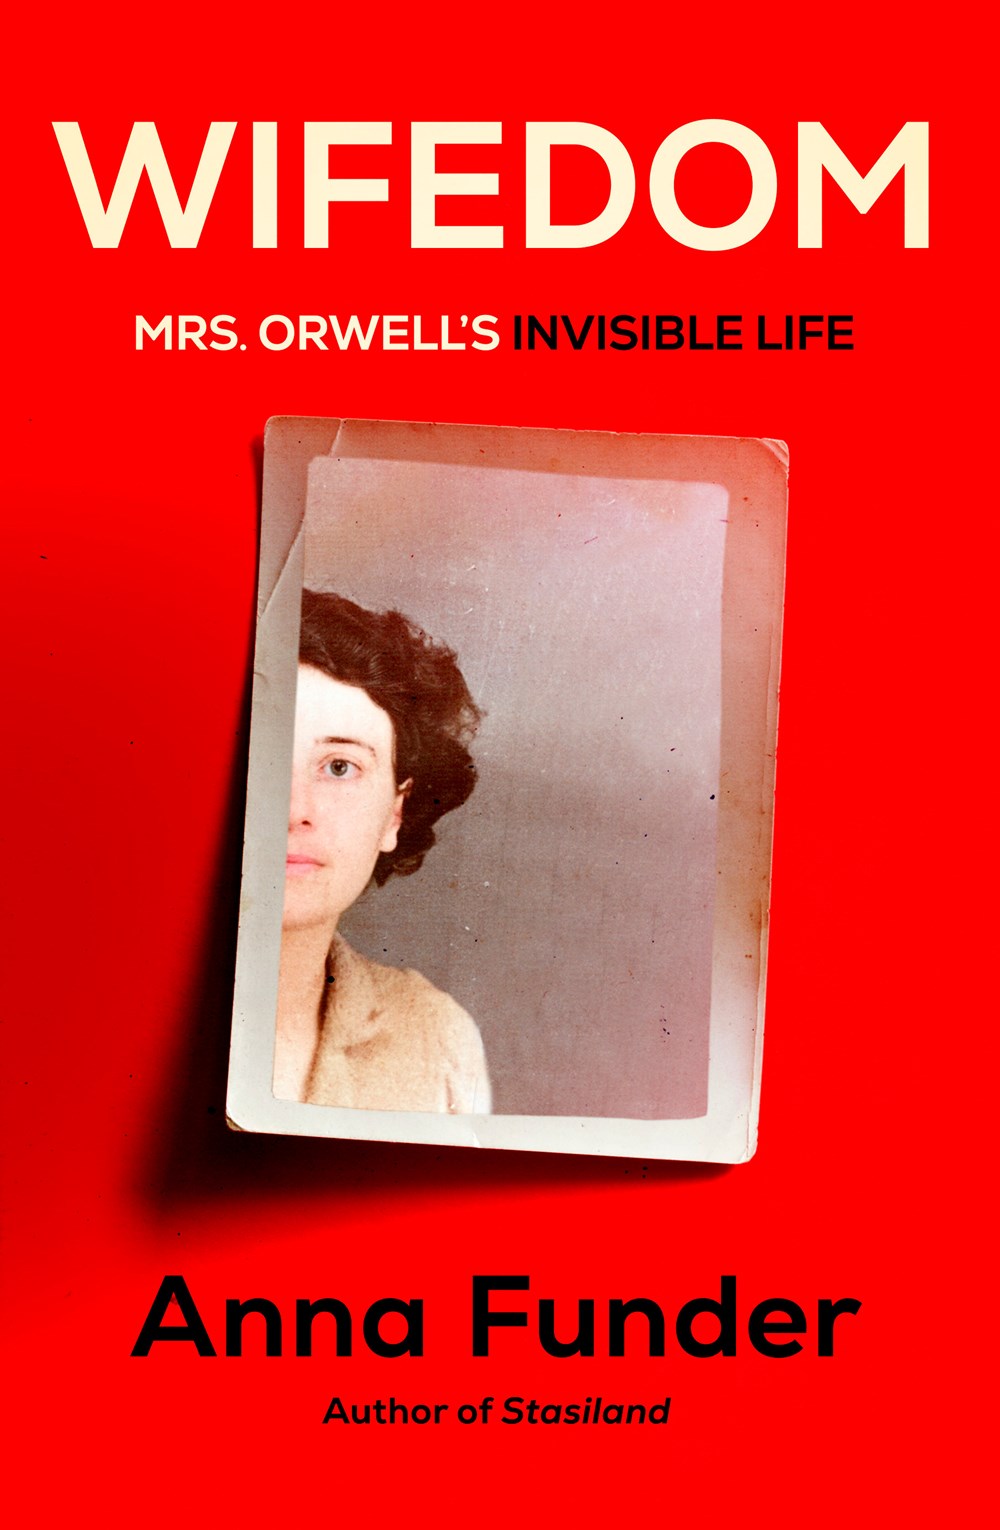 Wifedom: Mrs. Orwell’s Invisible Life